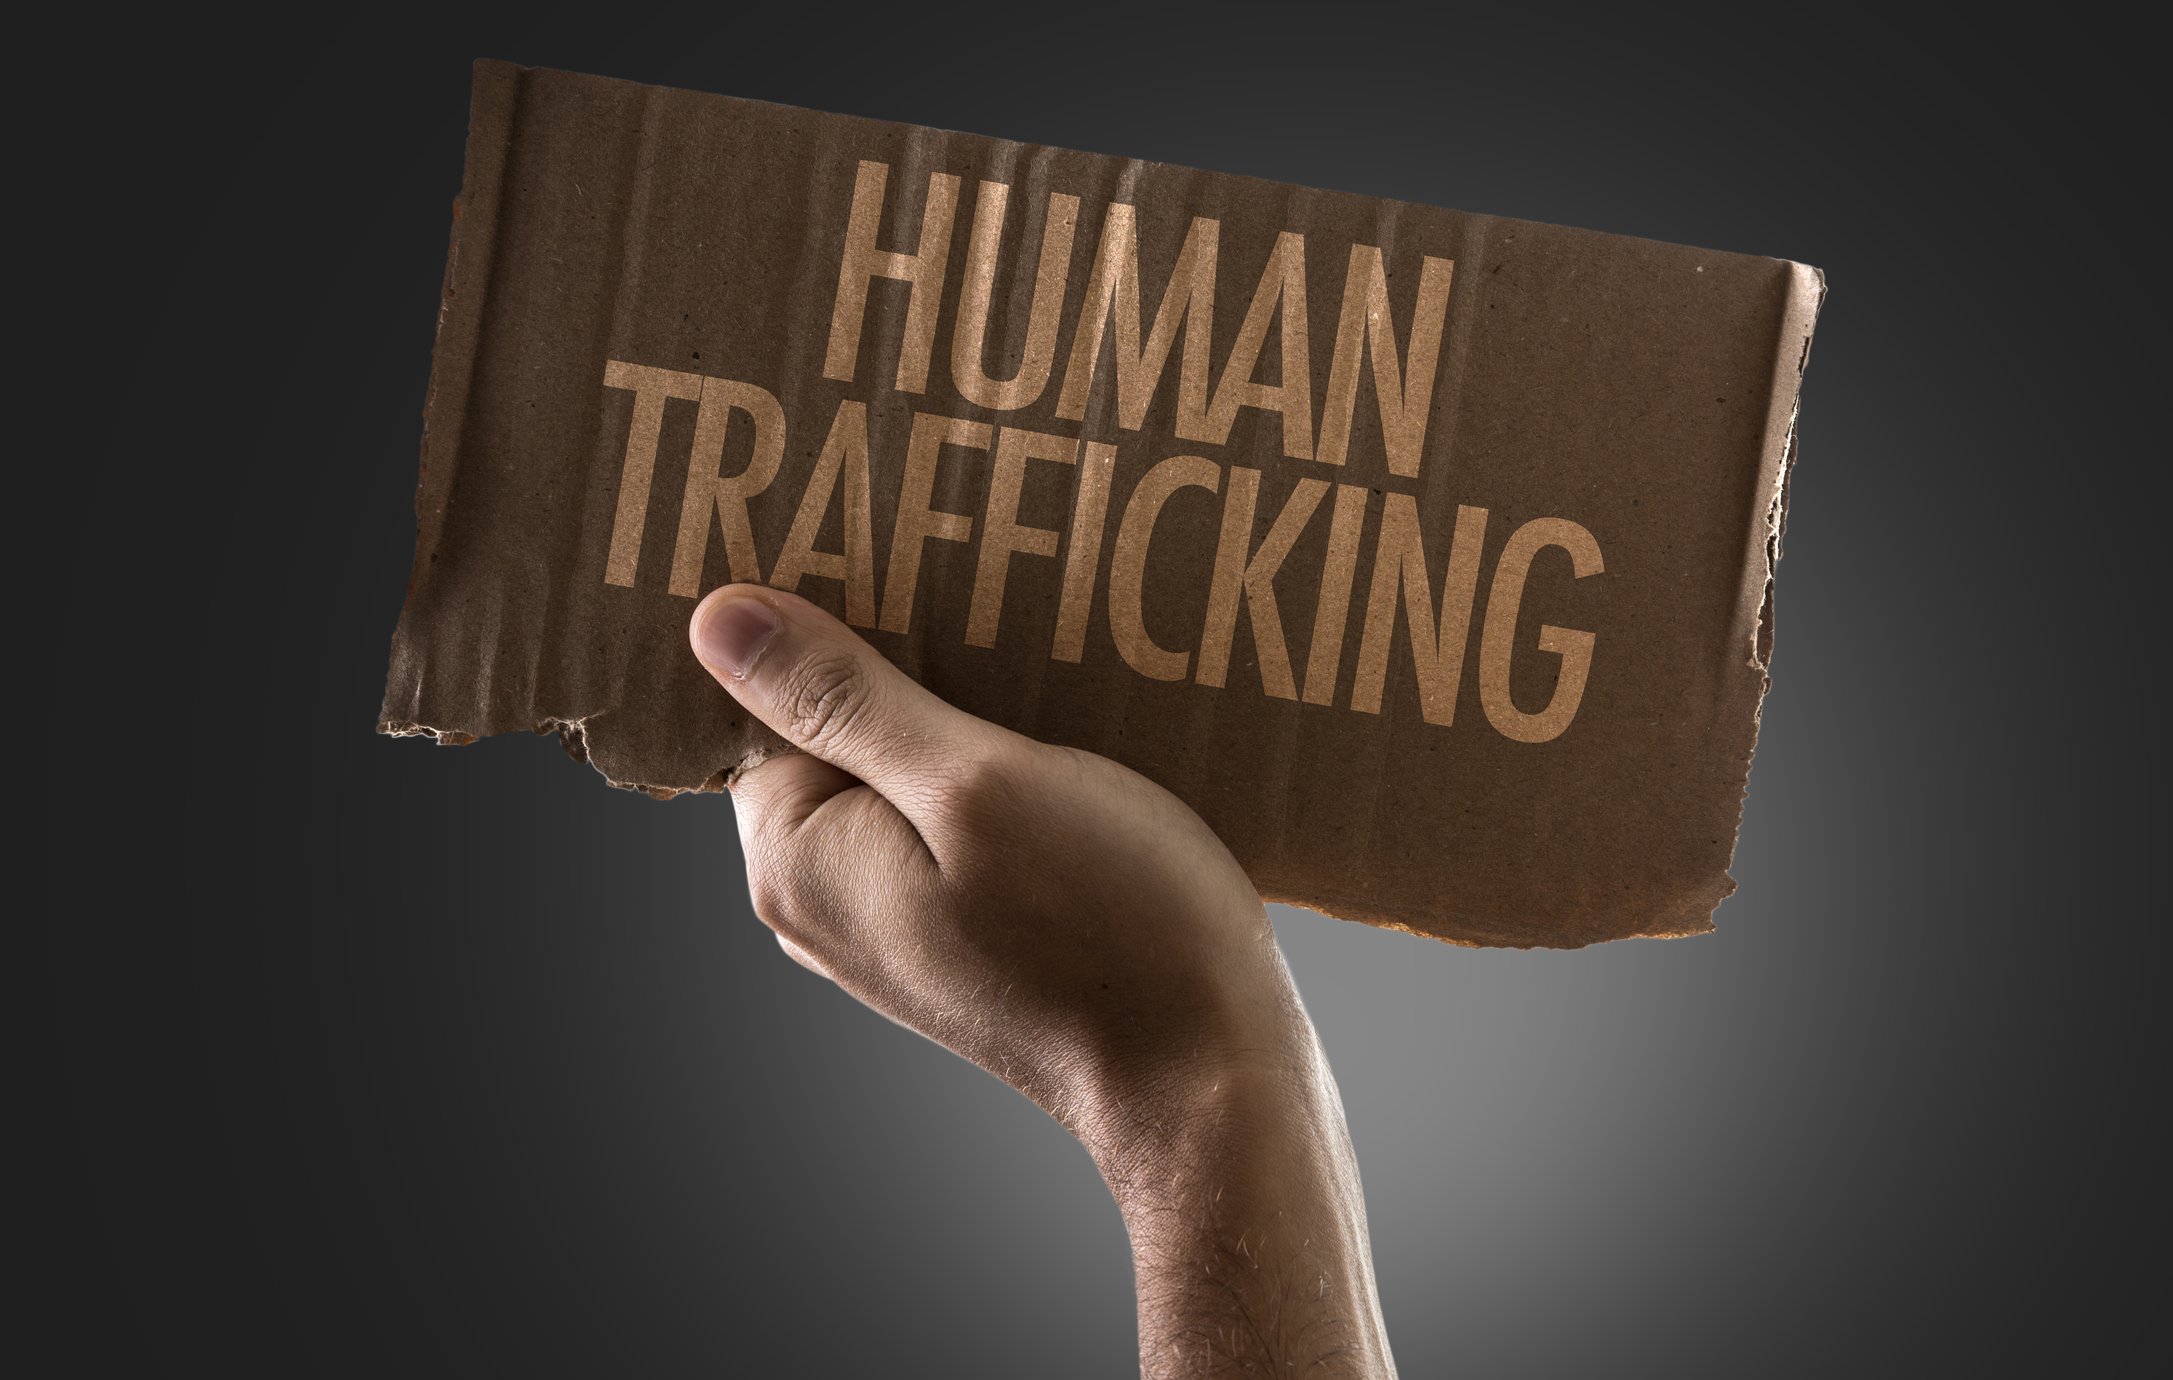 Much of the challenges around countering human trafficking and sexual exploitation in hospitality are a result of misconcepti